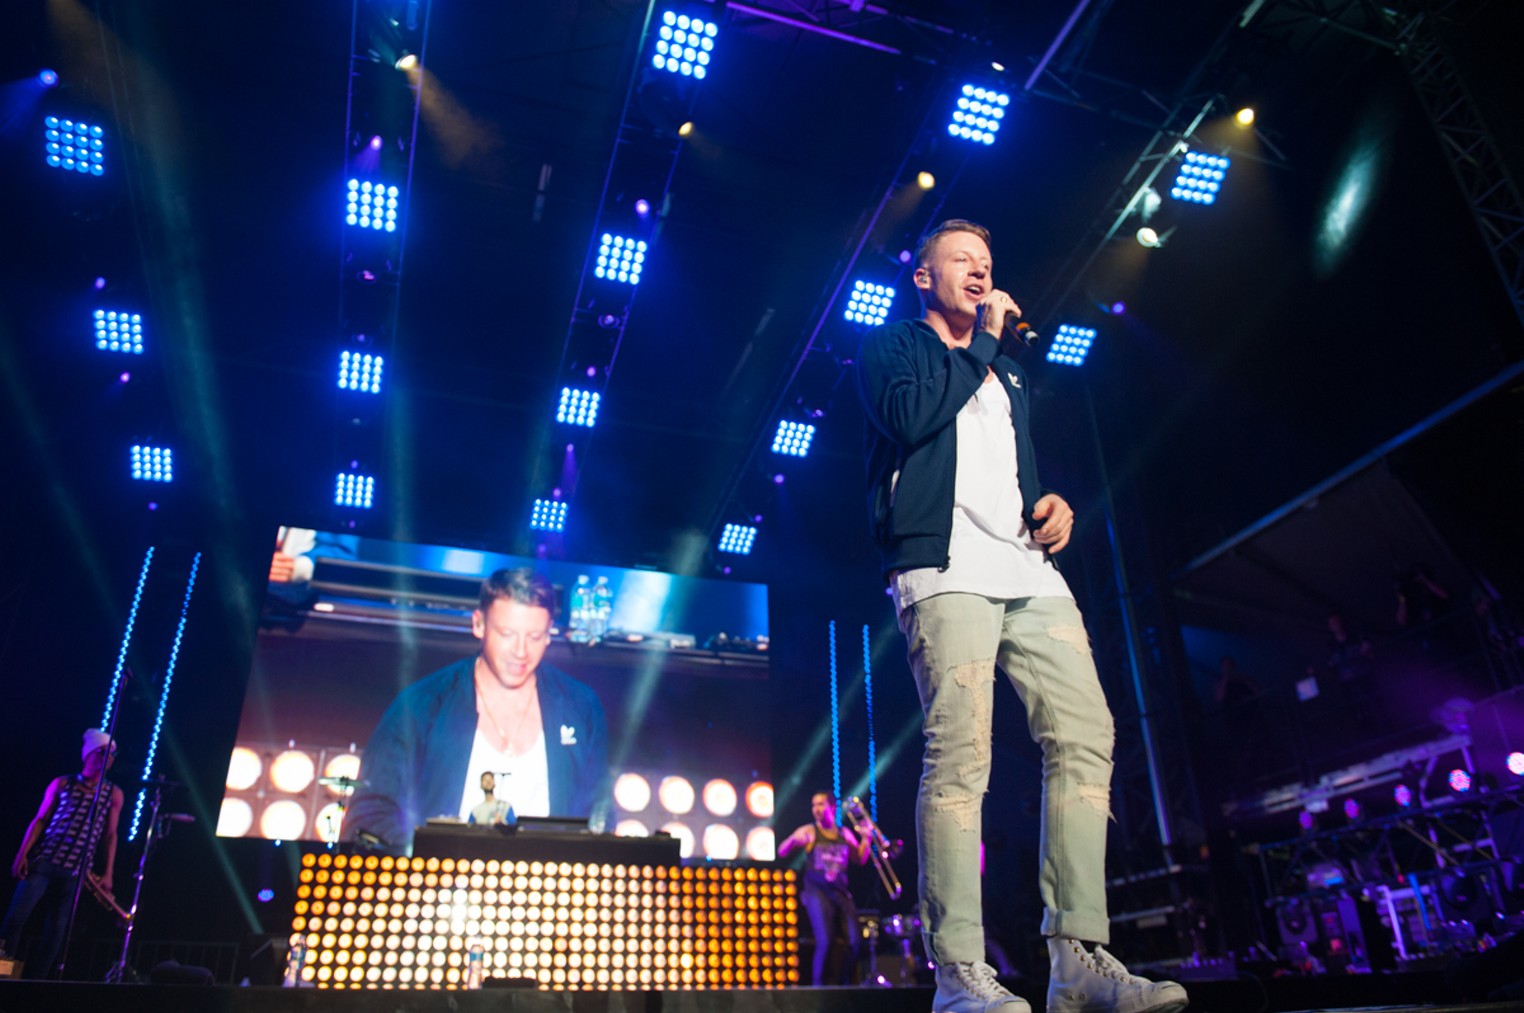 Capital One Beach Bash With Macklemore & Ryan Lewis and Imagine Dragons